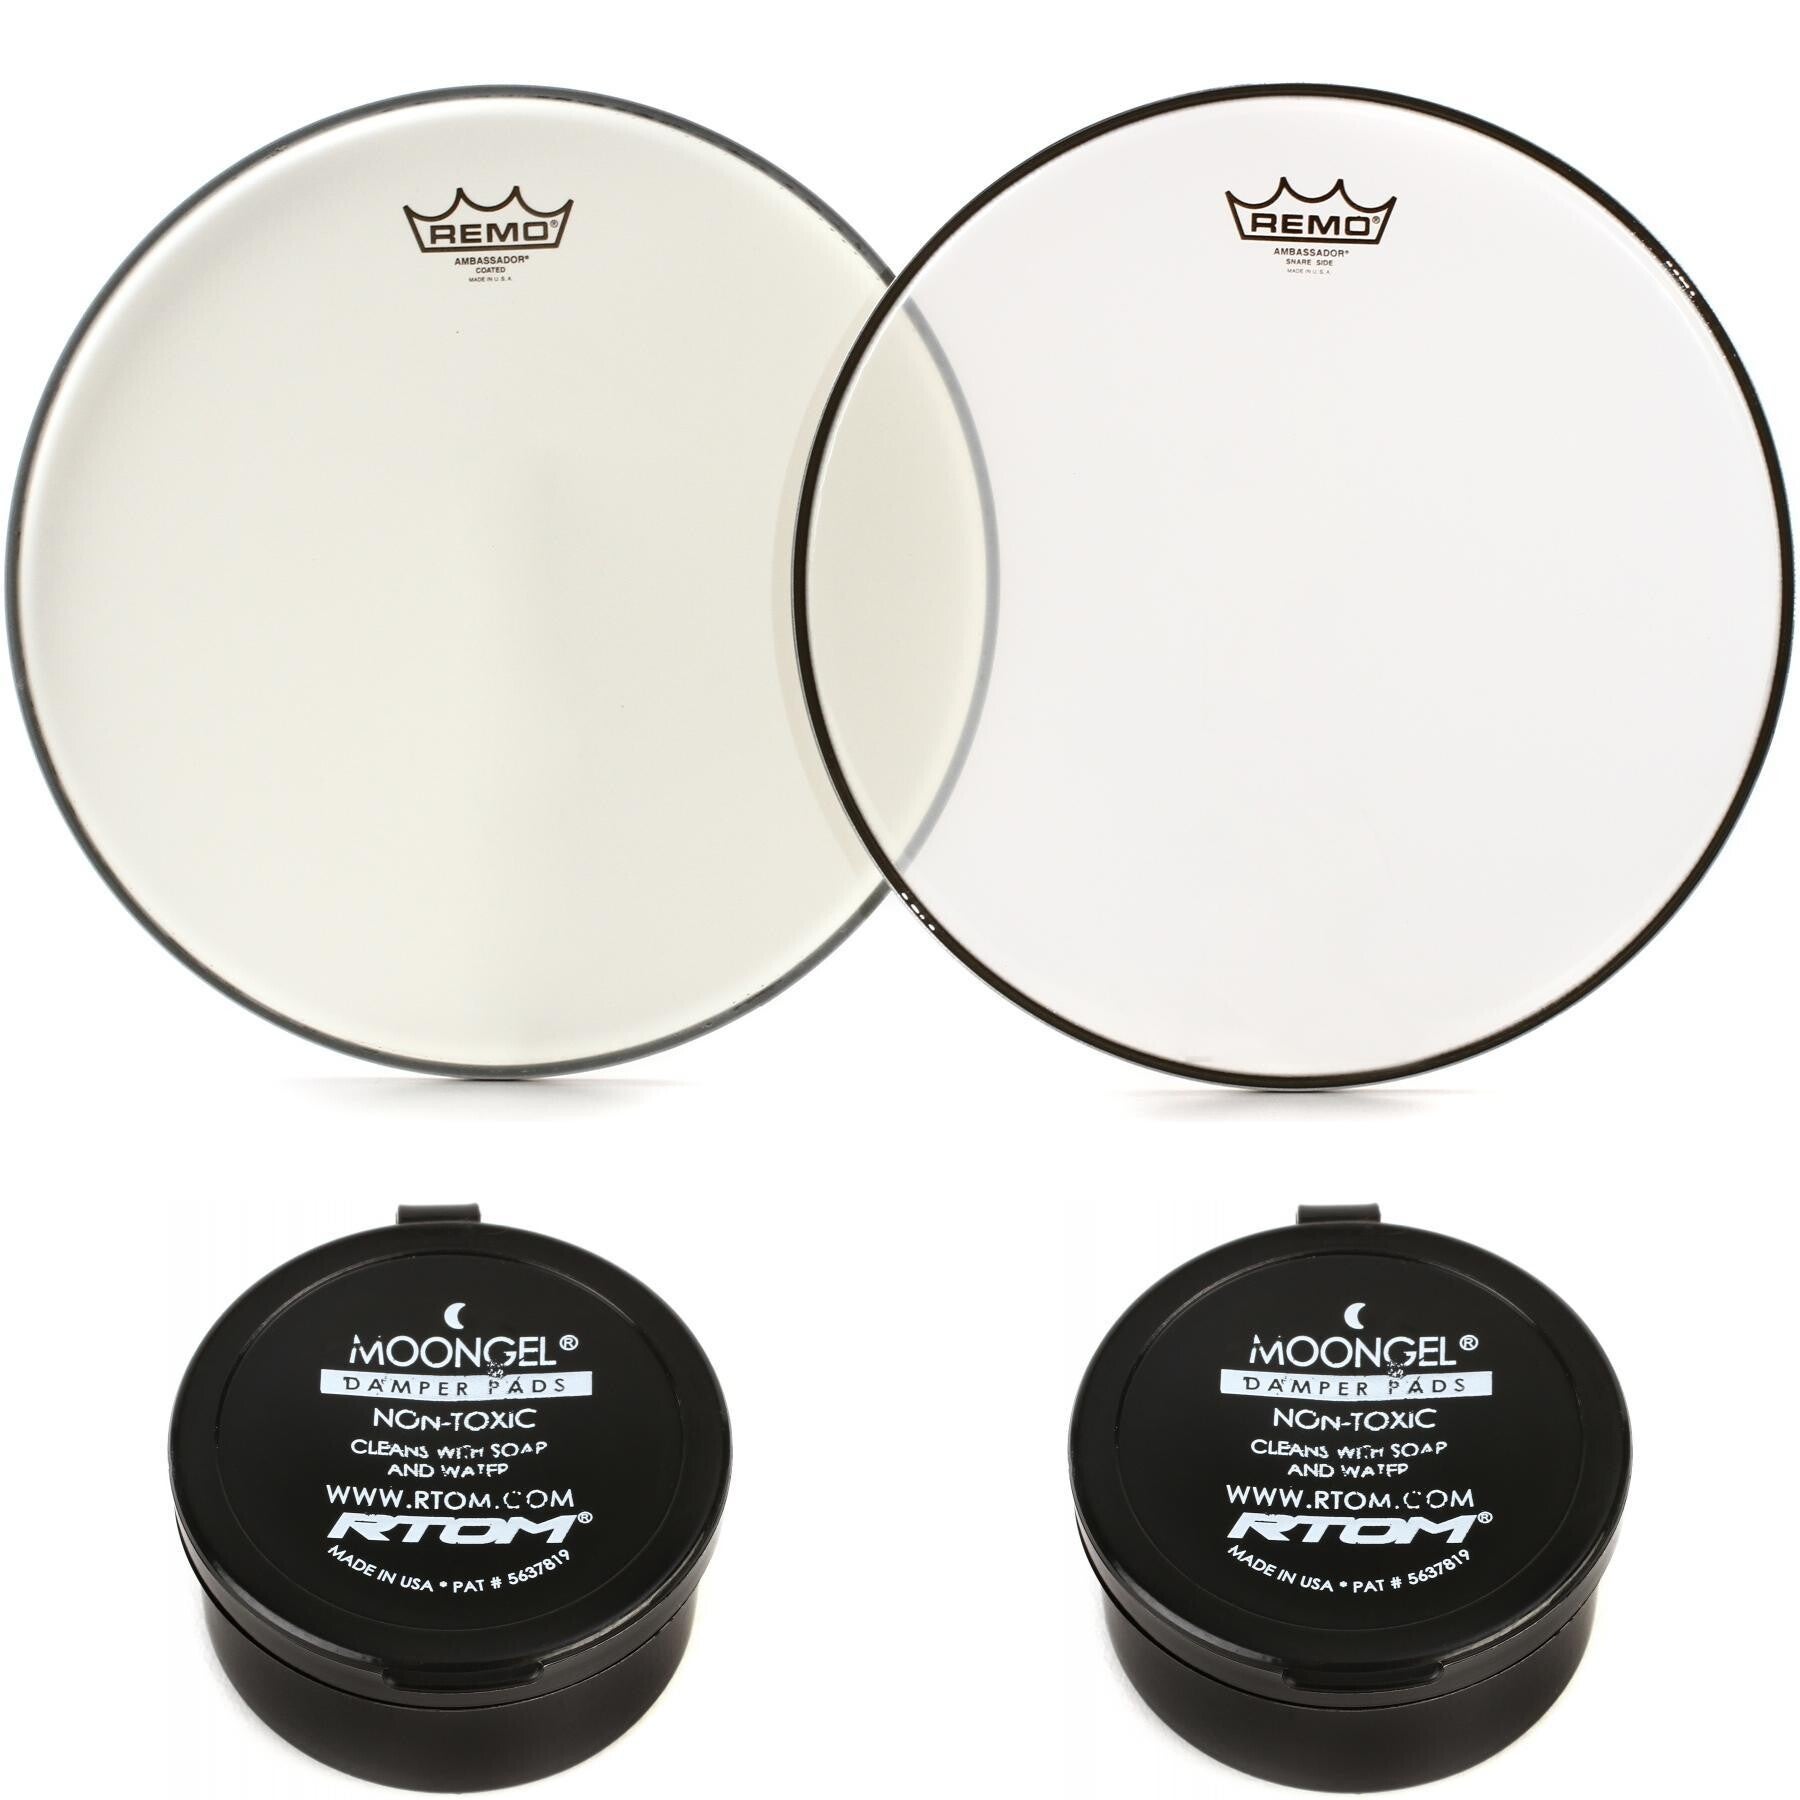 Remo Remo Ambassador Coated 2-piece Snare Propack with RTOM Gels